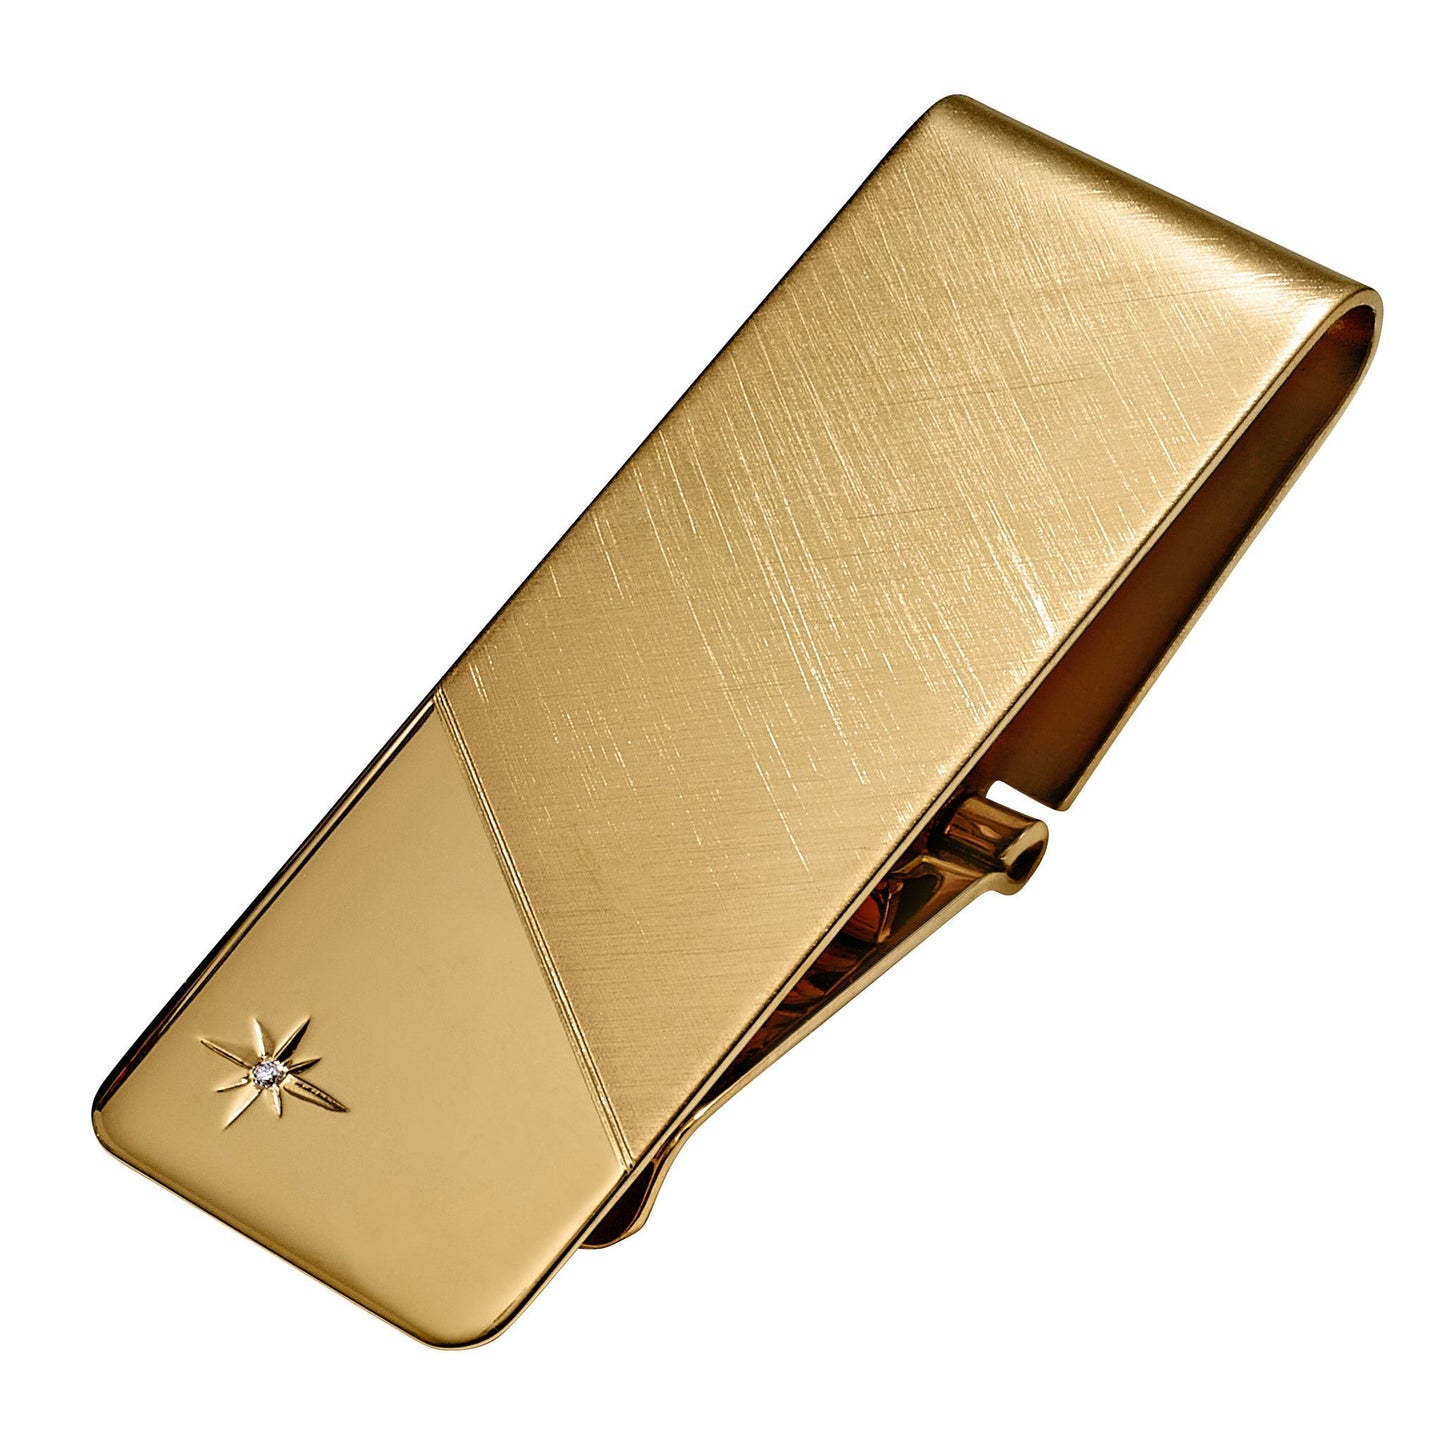 A 2-tone hinged money clip .75 pt diamond displayed on a neutral white background.